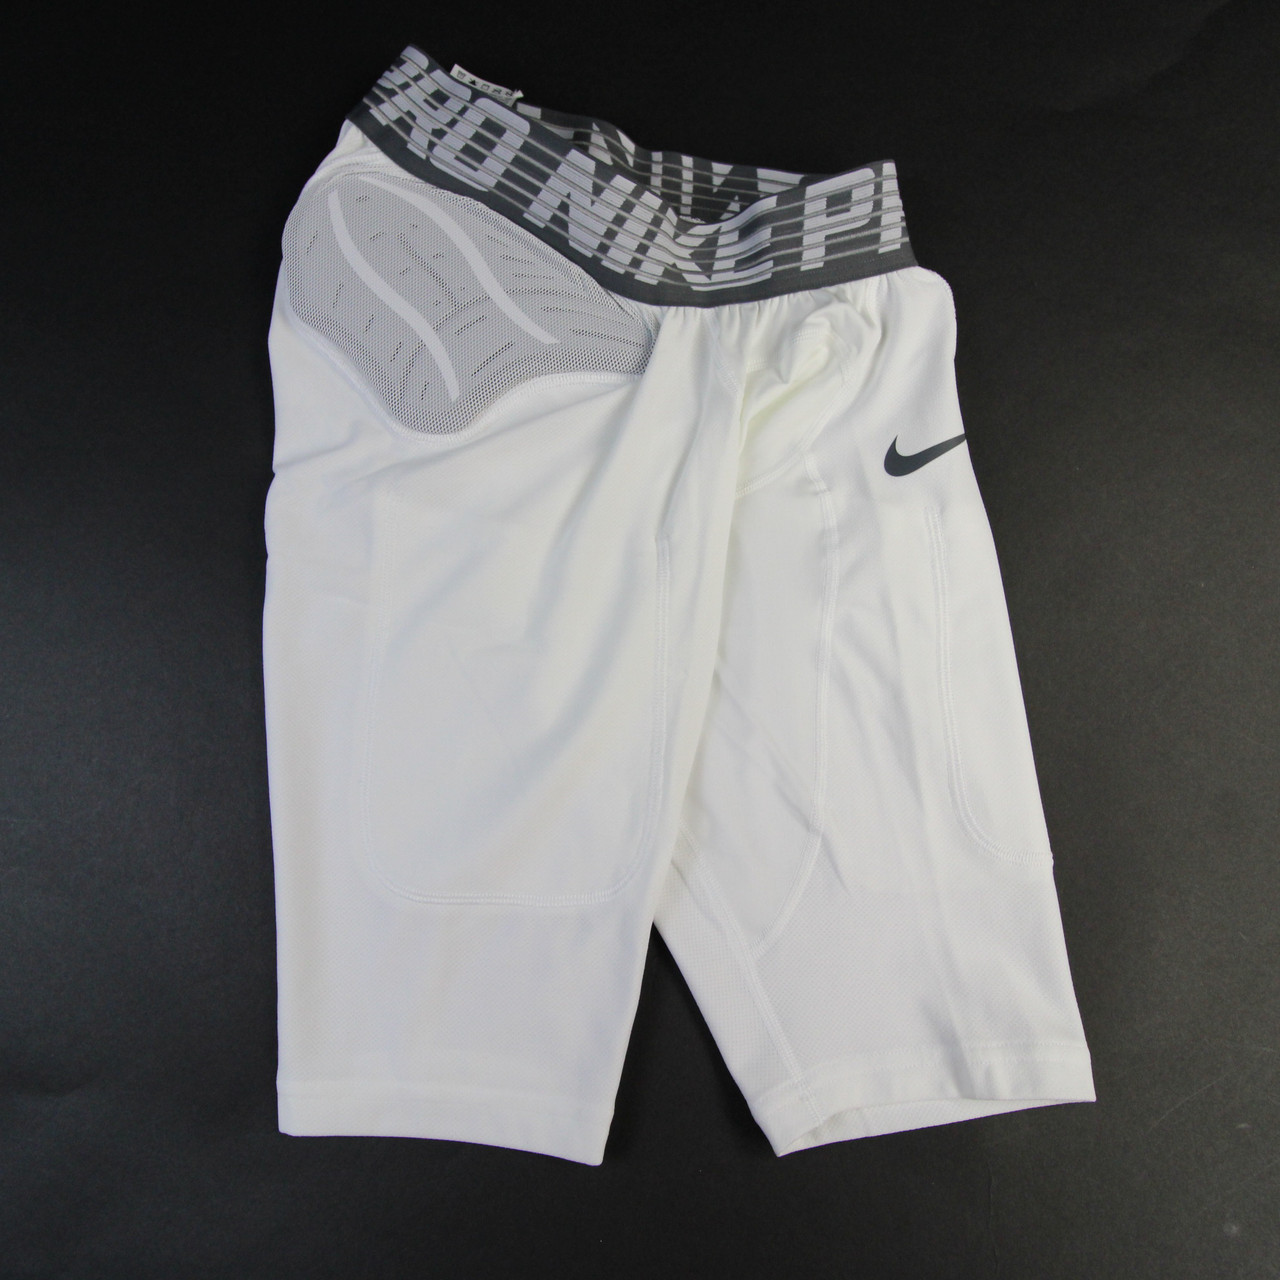 Nike Pro Hyperstrong Padded Compression Shorts Men's White New